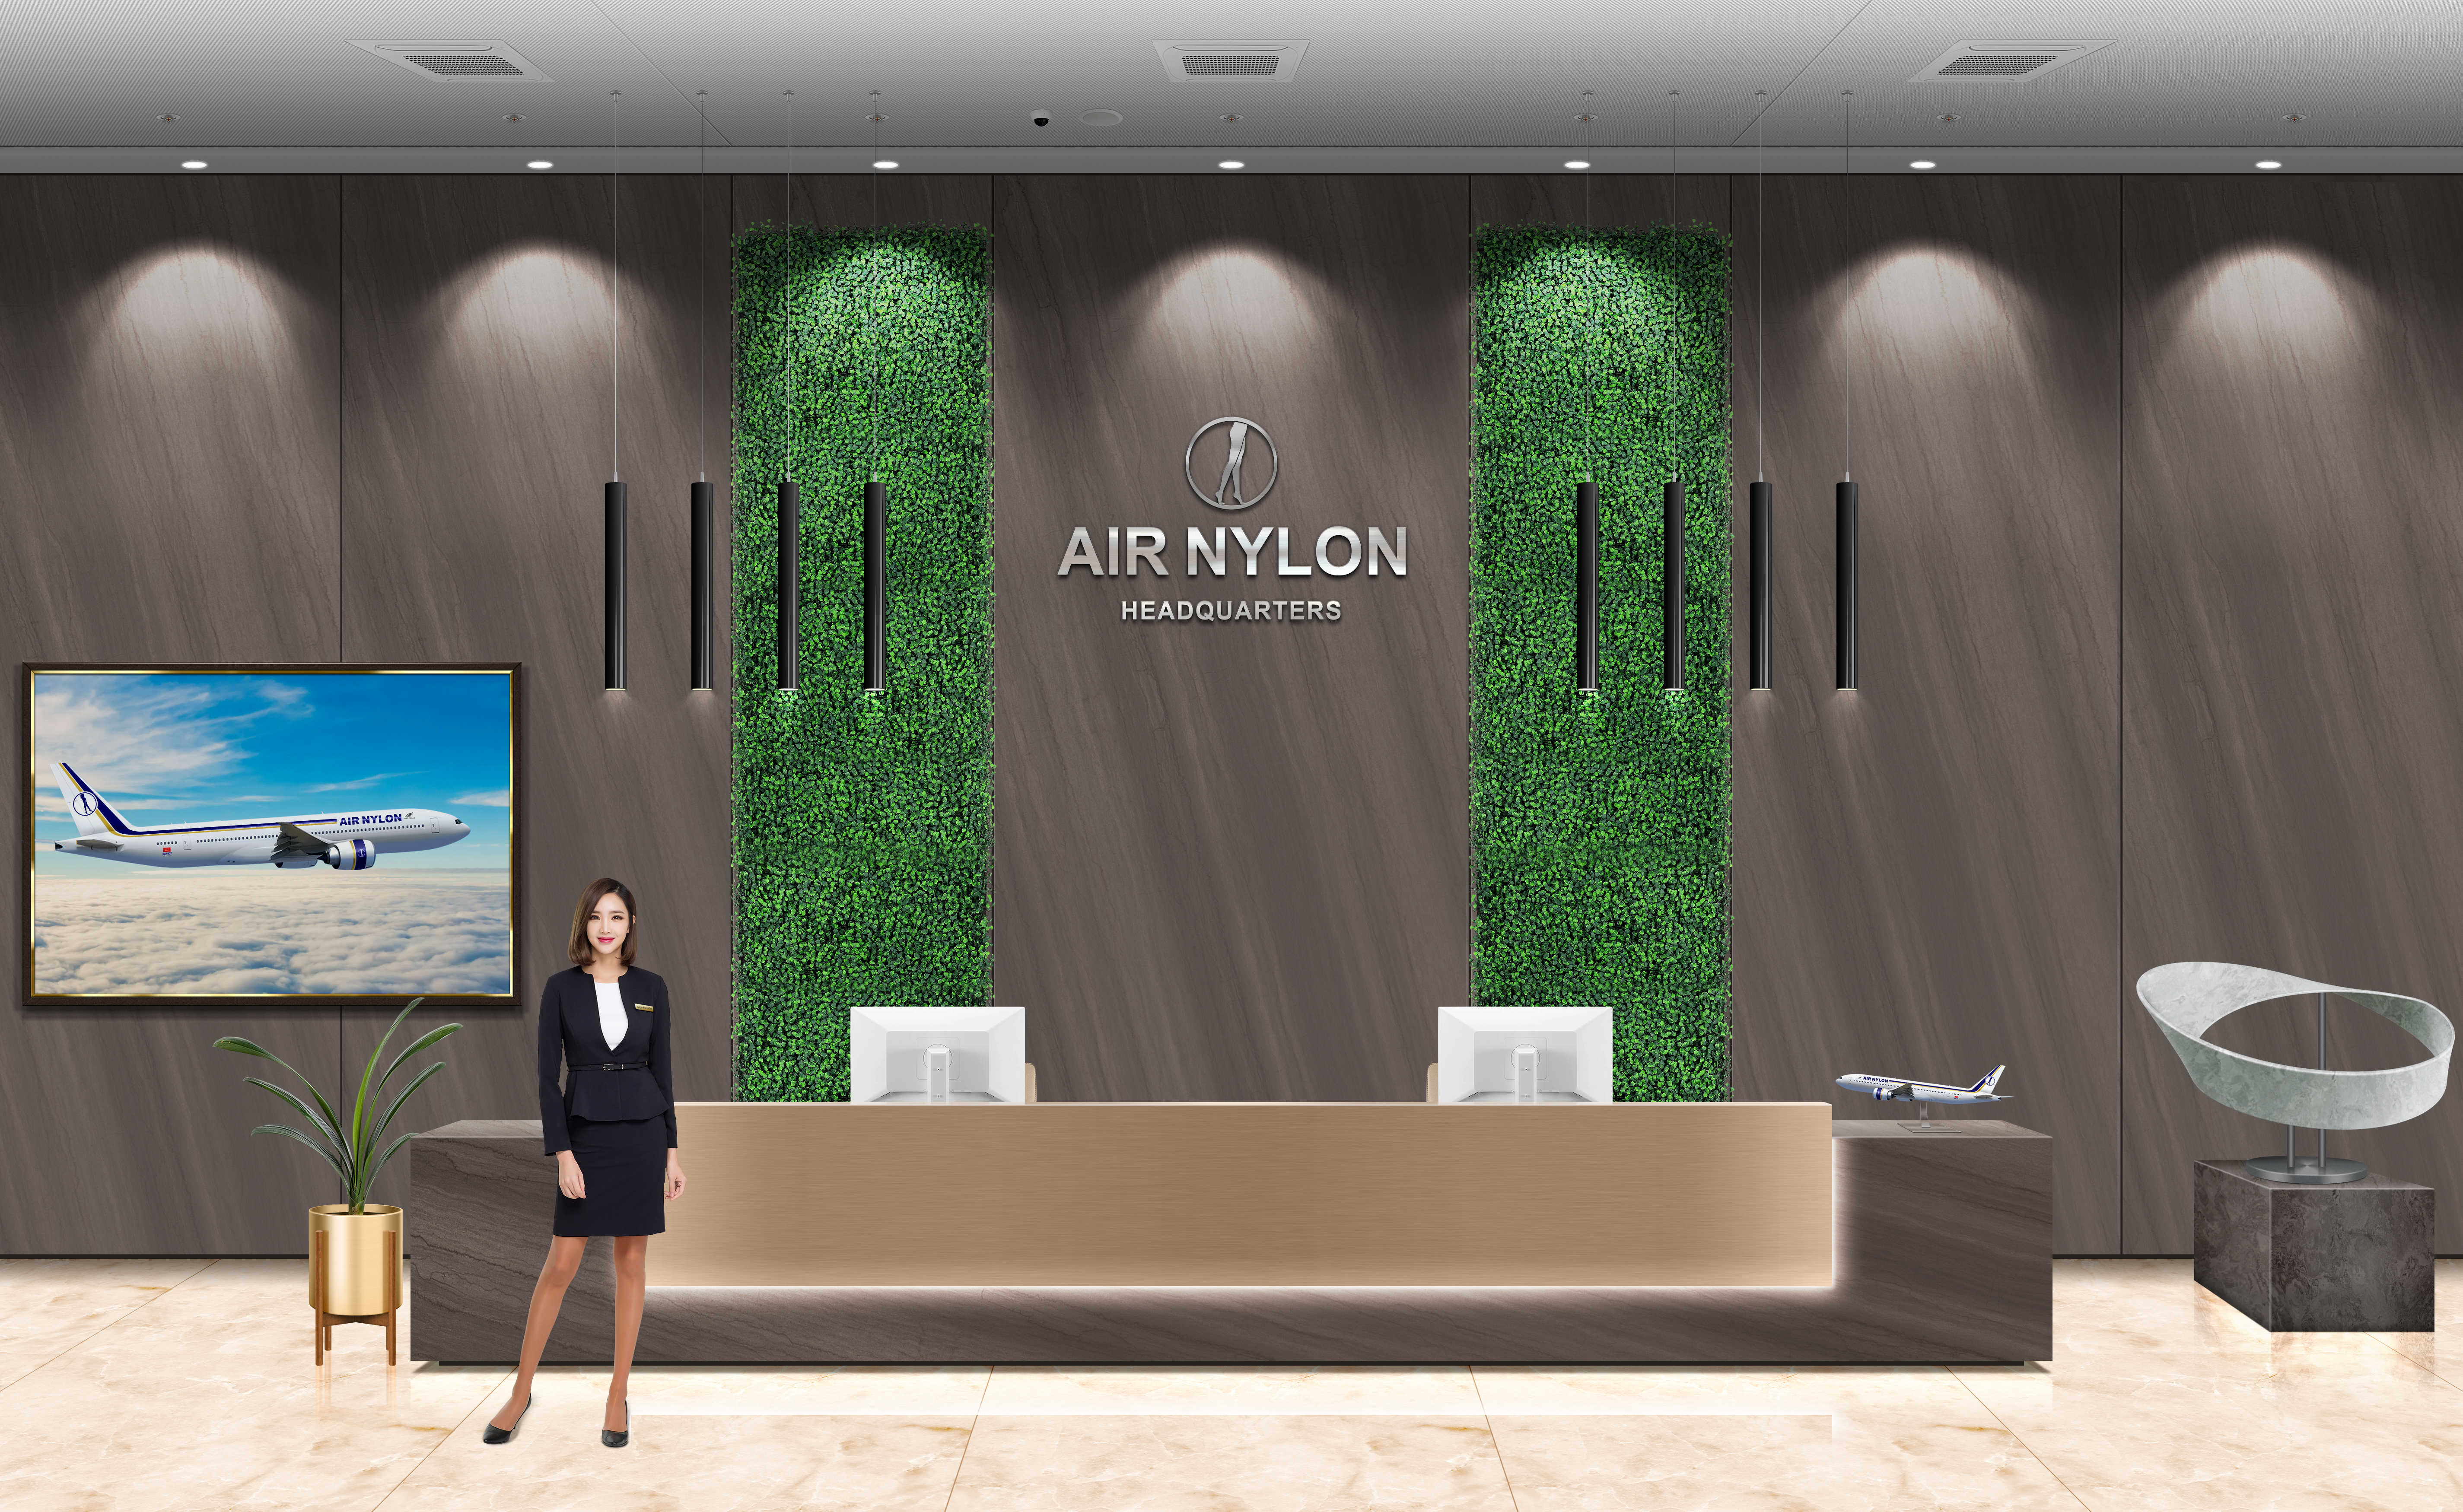 Reception Reception Desk Front Desk Women Looking At Viewer Standing Office Girl Smiling Aircraft As 5700x3500